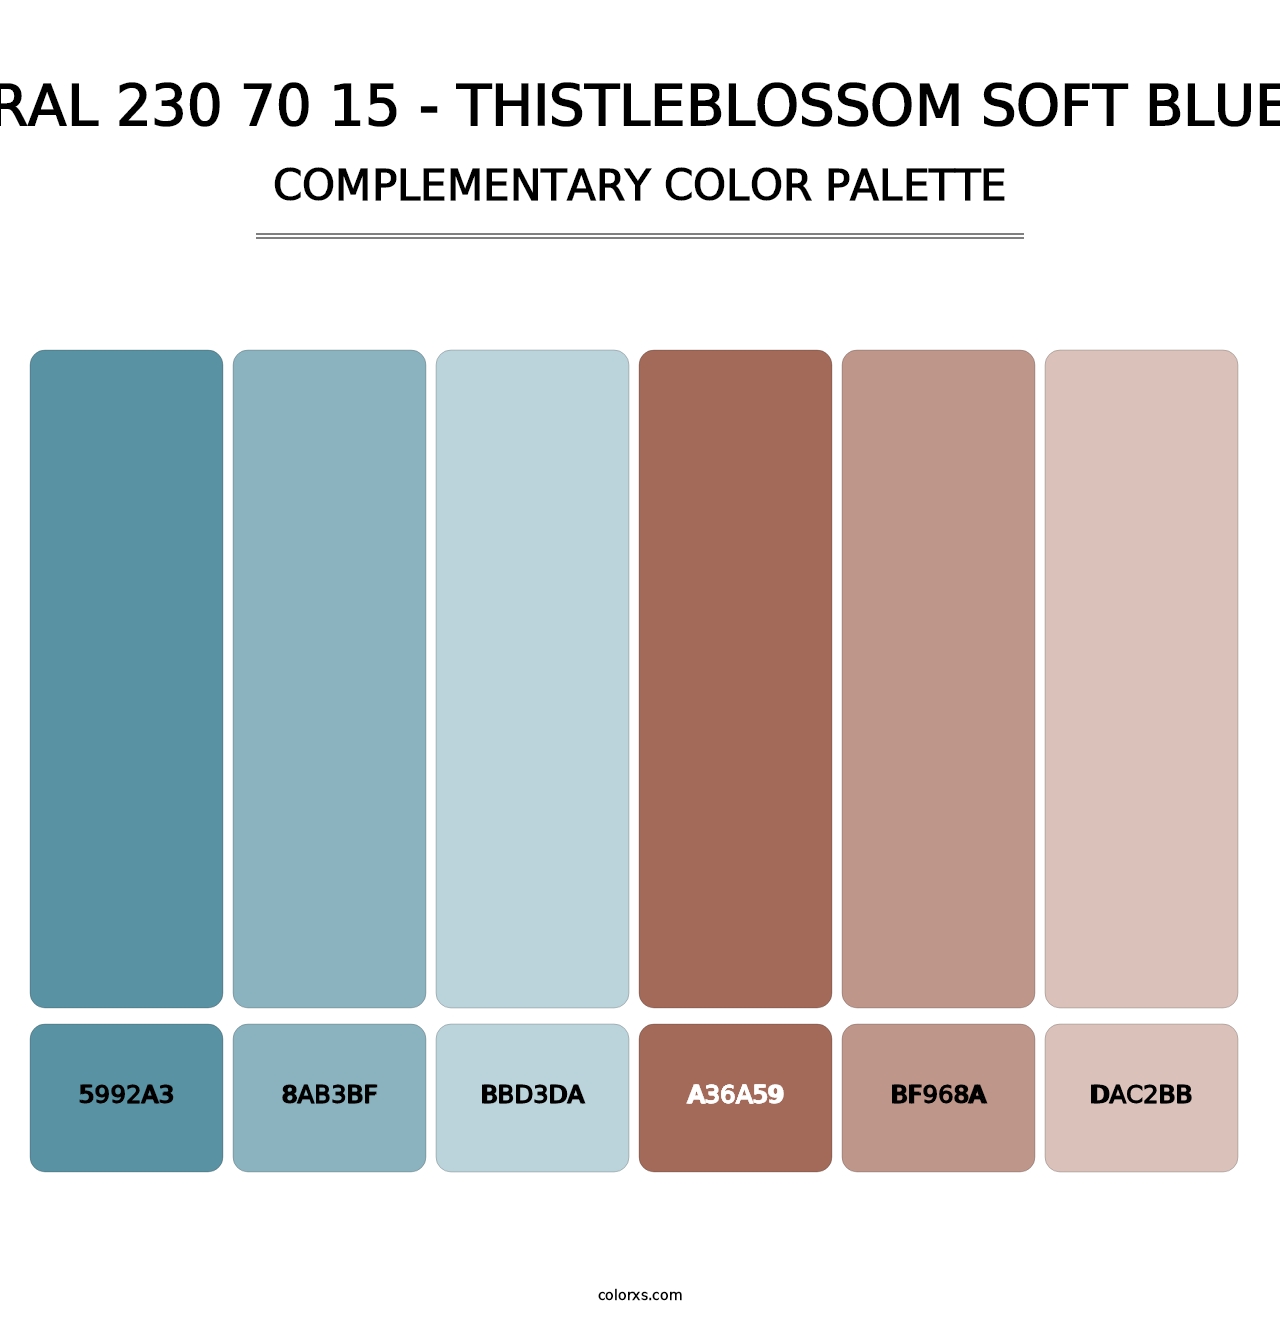 RAL 230 70 15 - Thistleblossom Soft Blue - Complementary Color Palette